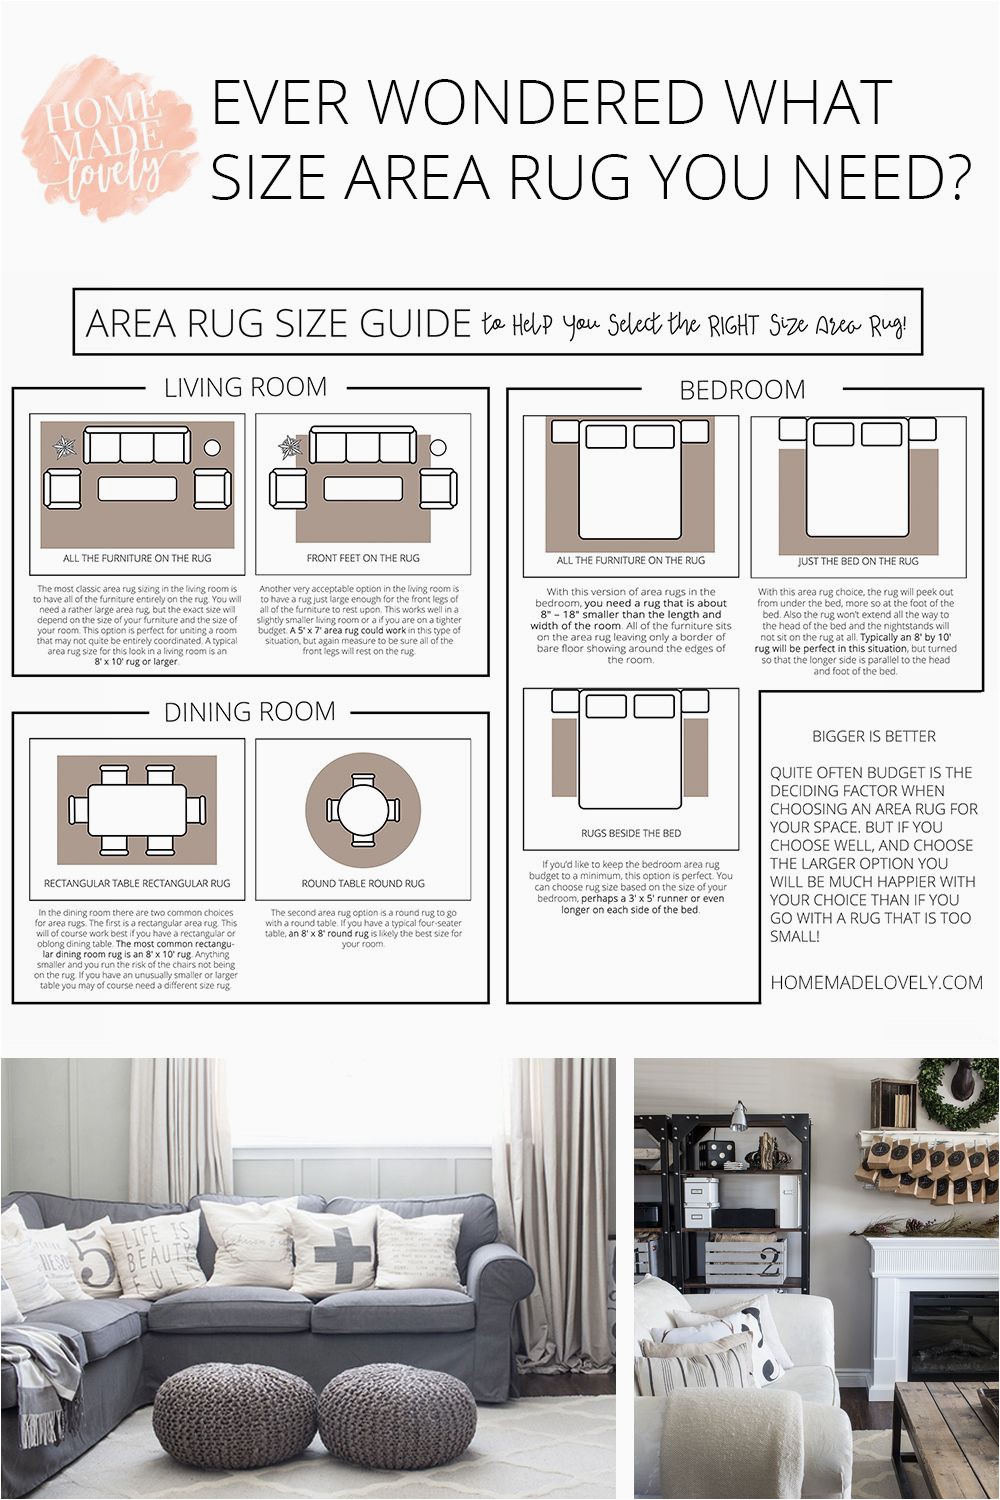 Best Size area Rug for Bedroom area Rug Size Guide to Help You Select the Right Size area